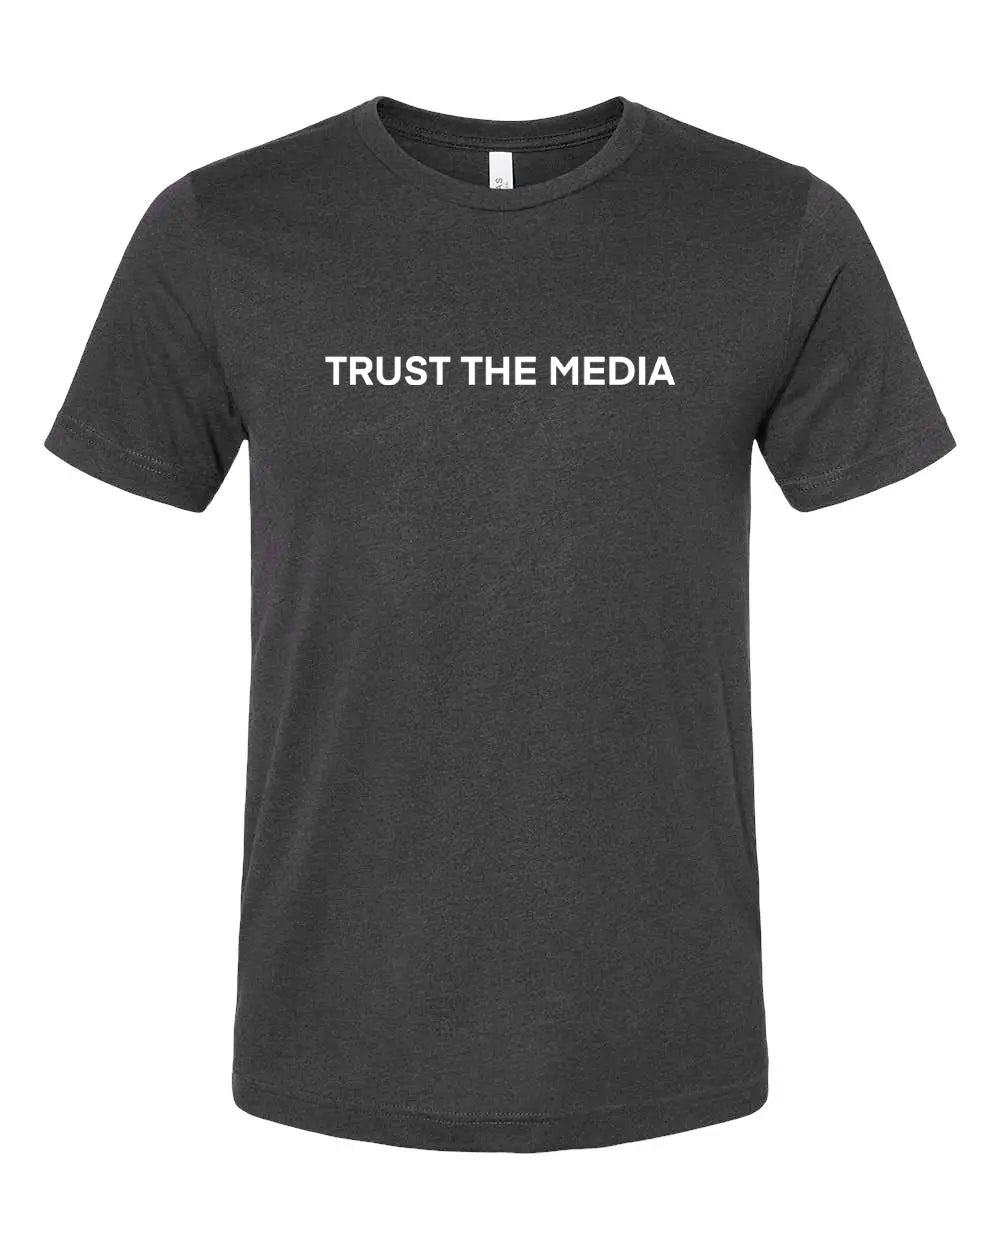 TRUST THE MEDIA T-Shirts | Unsettled Apparel